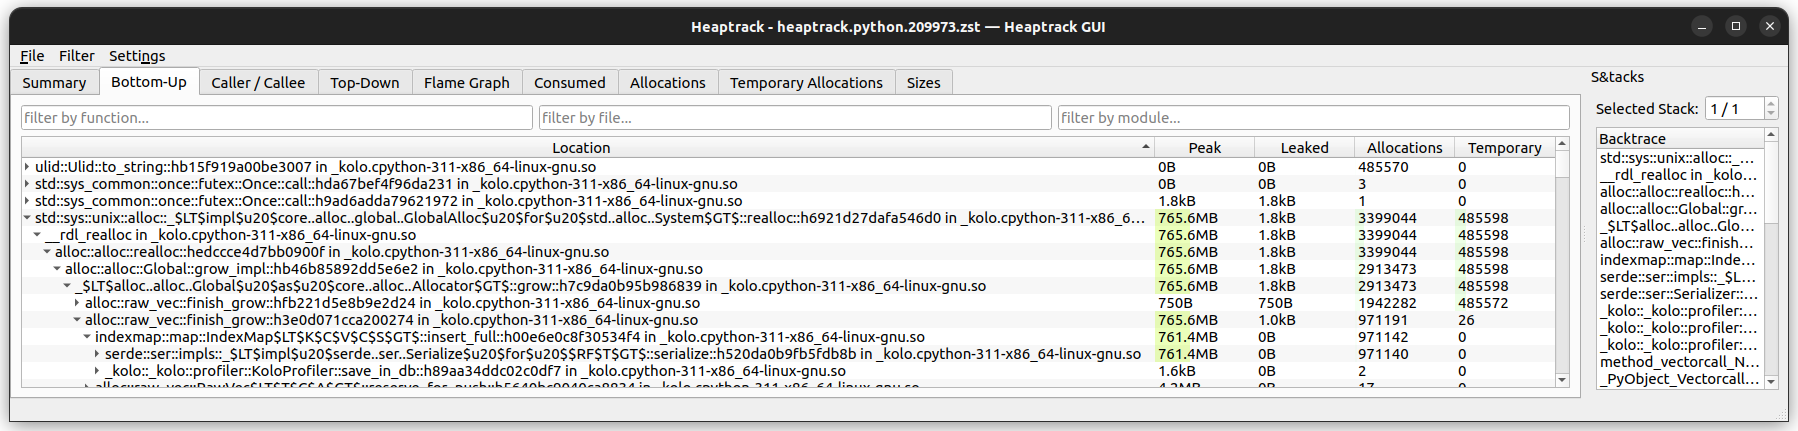 heaptrack's Bottom-Up view showing 765MB memory usage.